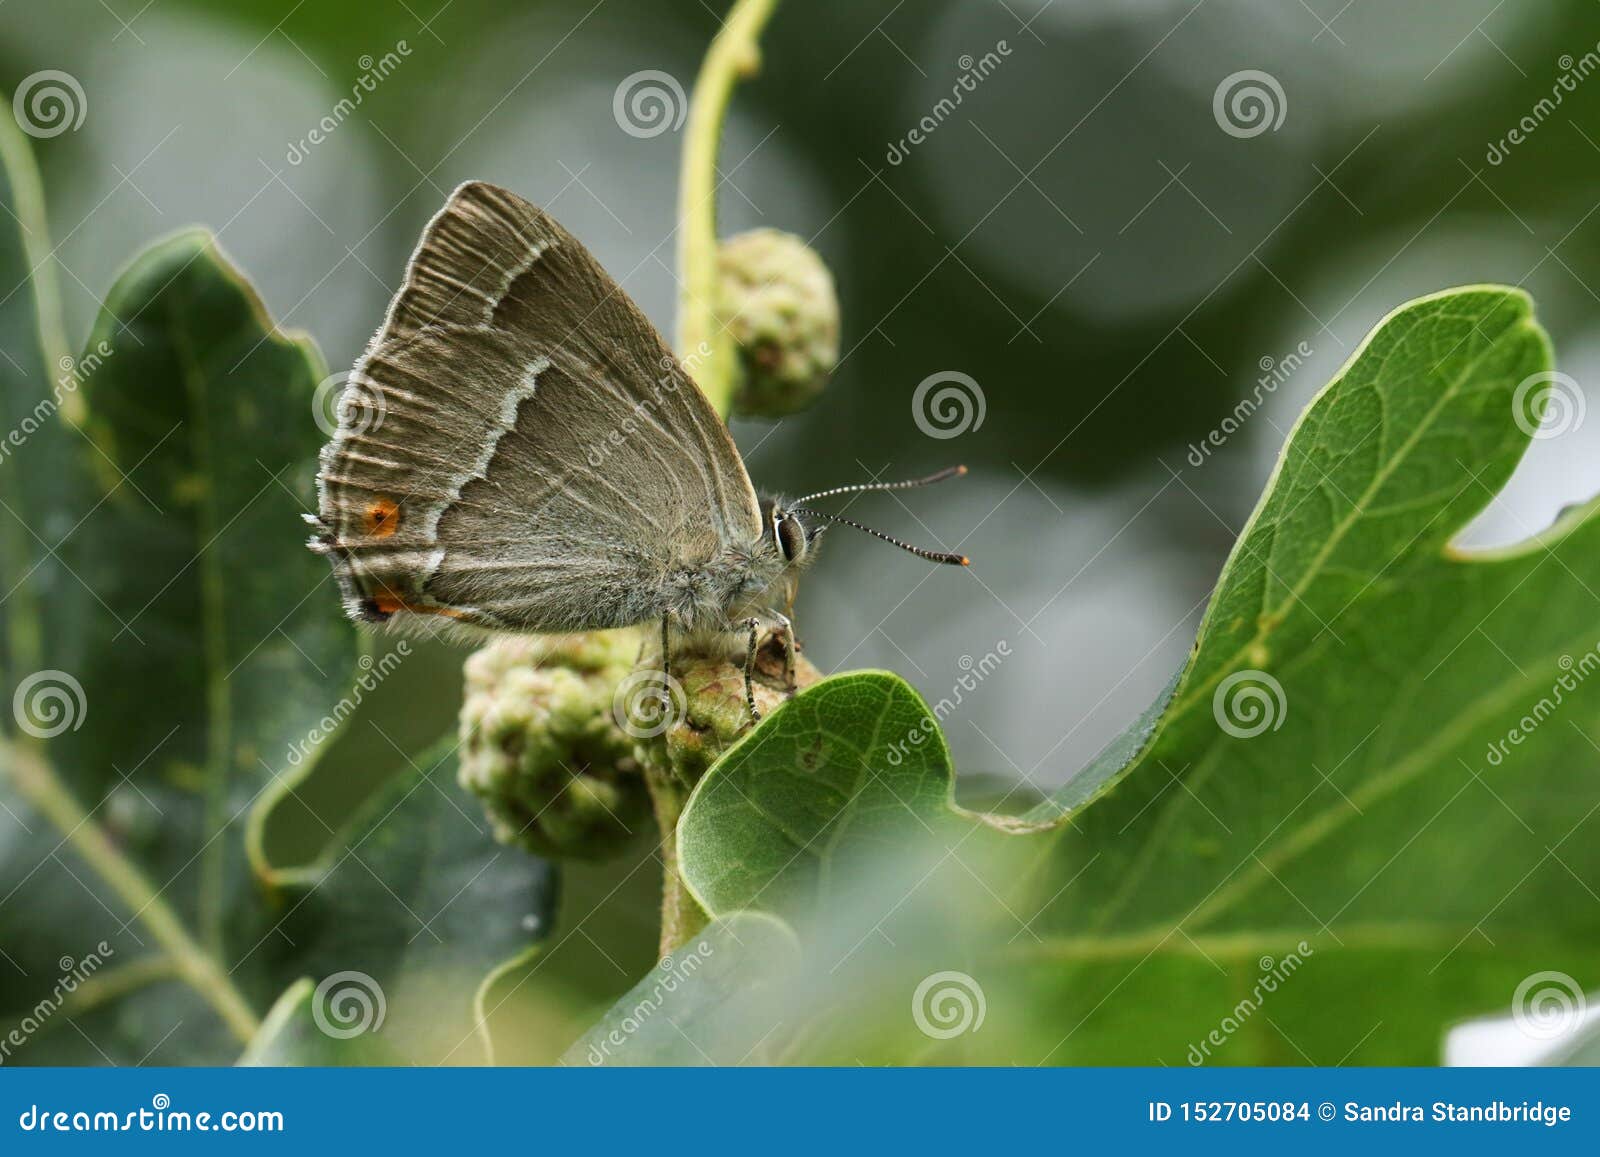 a beautiful purple hairstreak butterfly, favonius quercus, perched on an acorn and feeding on the honeydew.